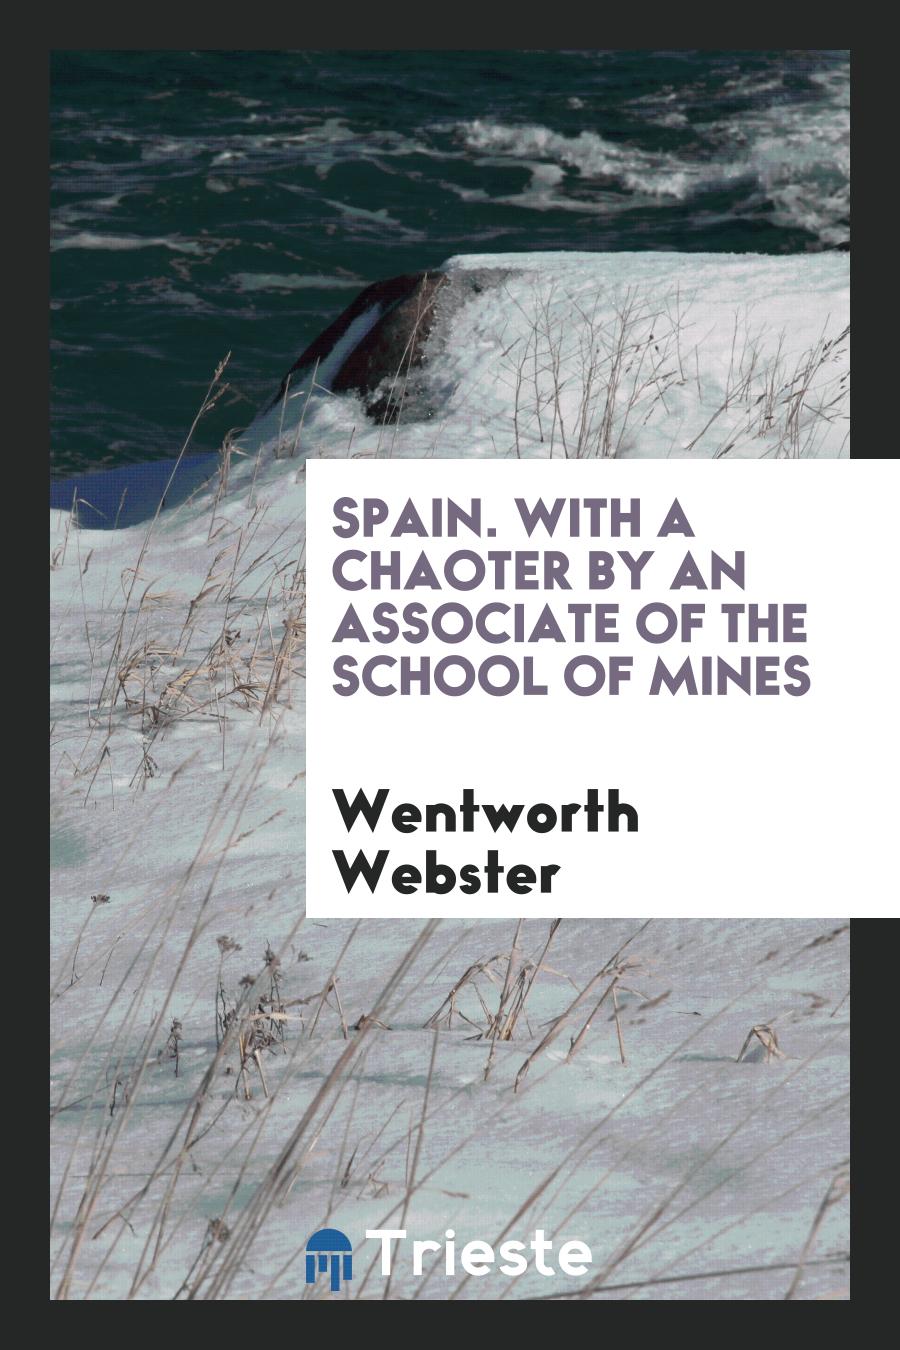 Spain. With a Chaoter by an Associate of the School of Mines